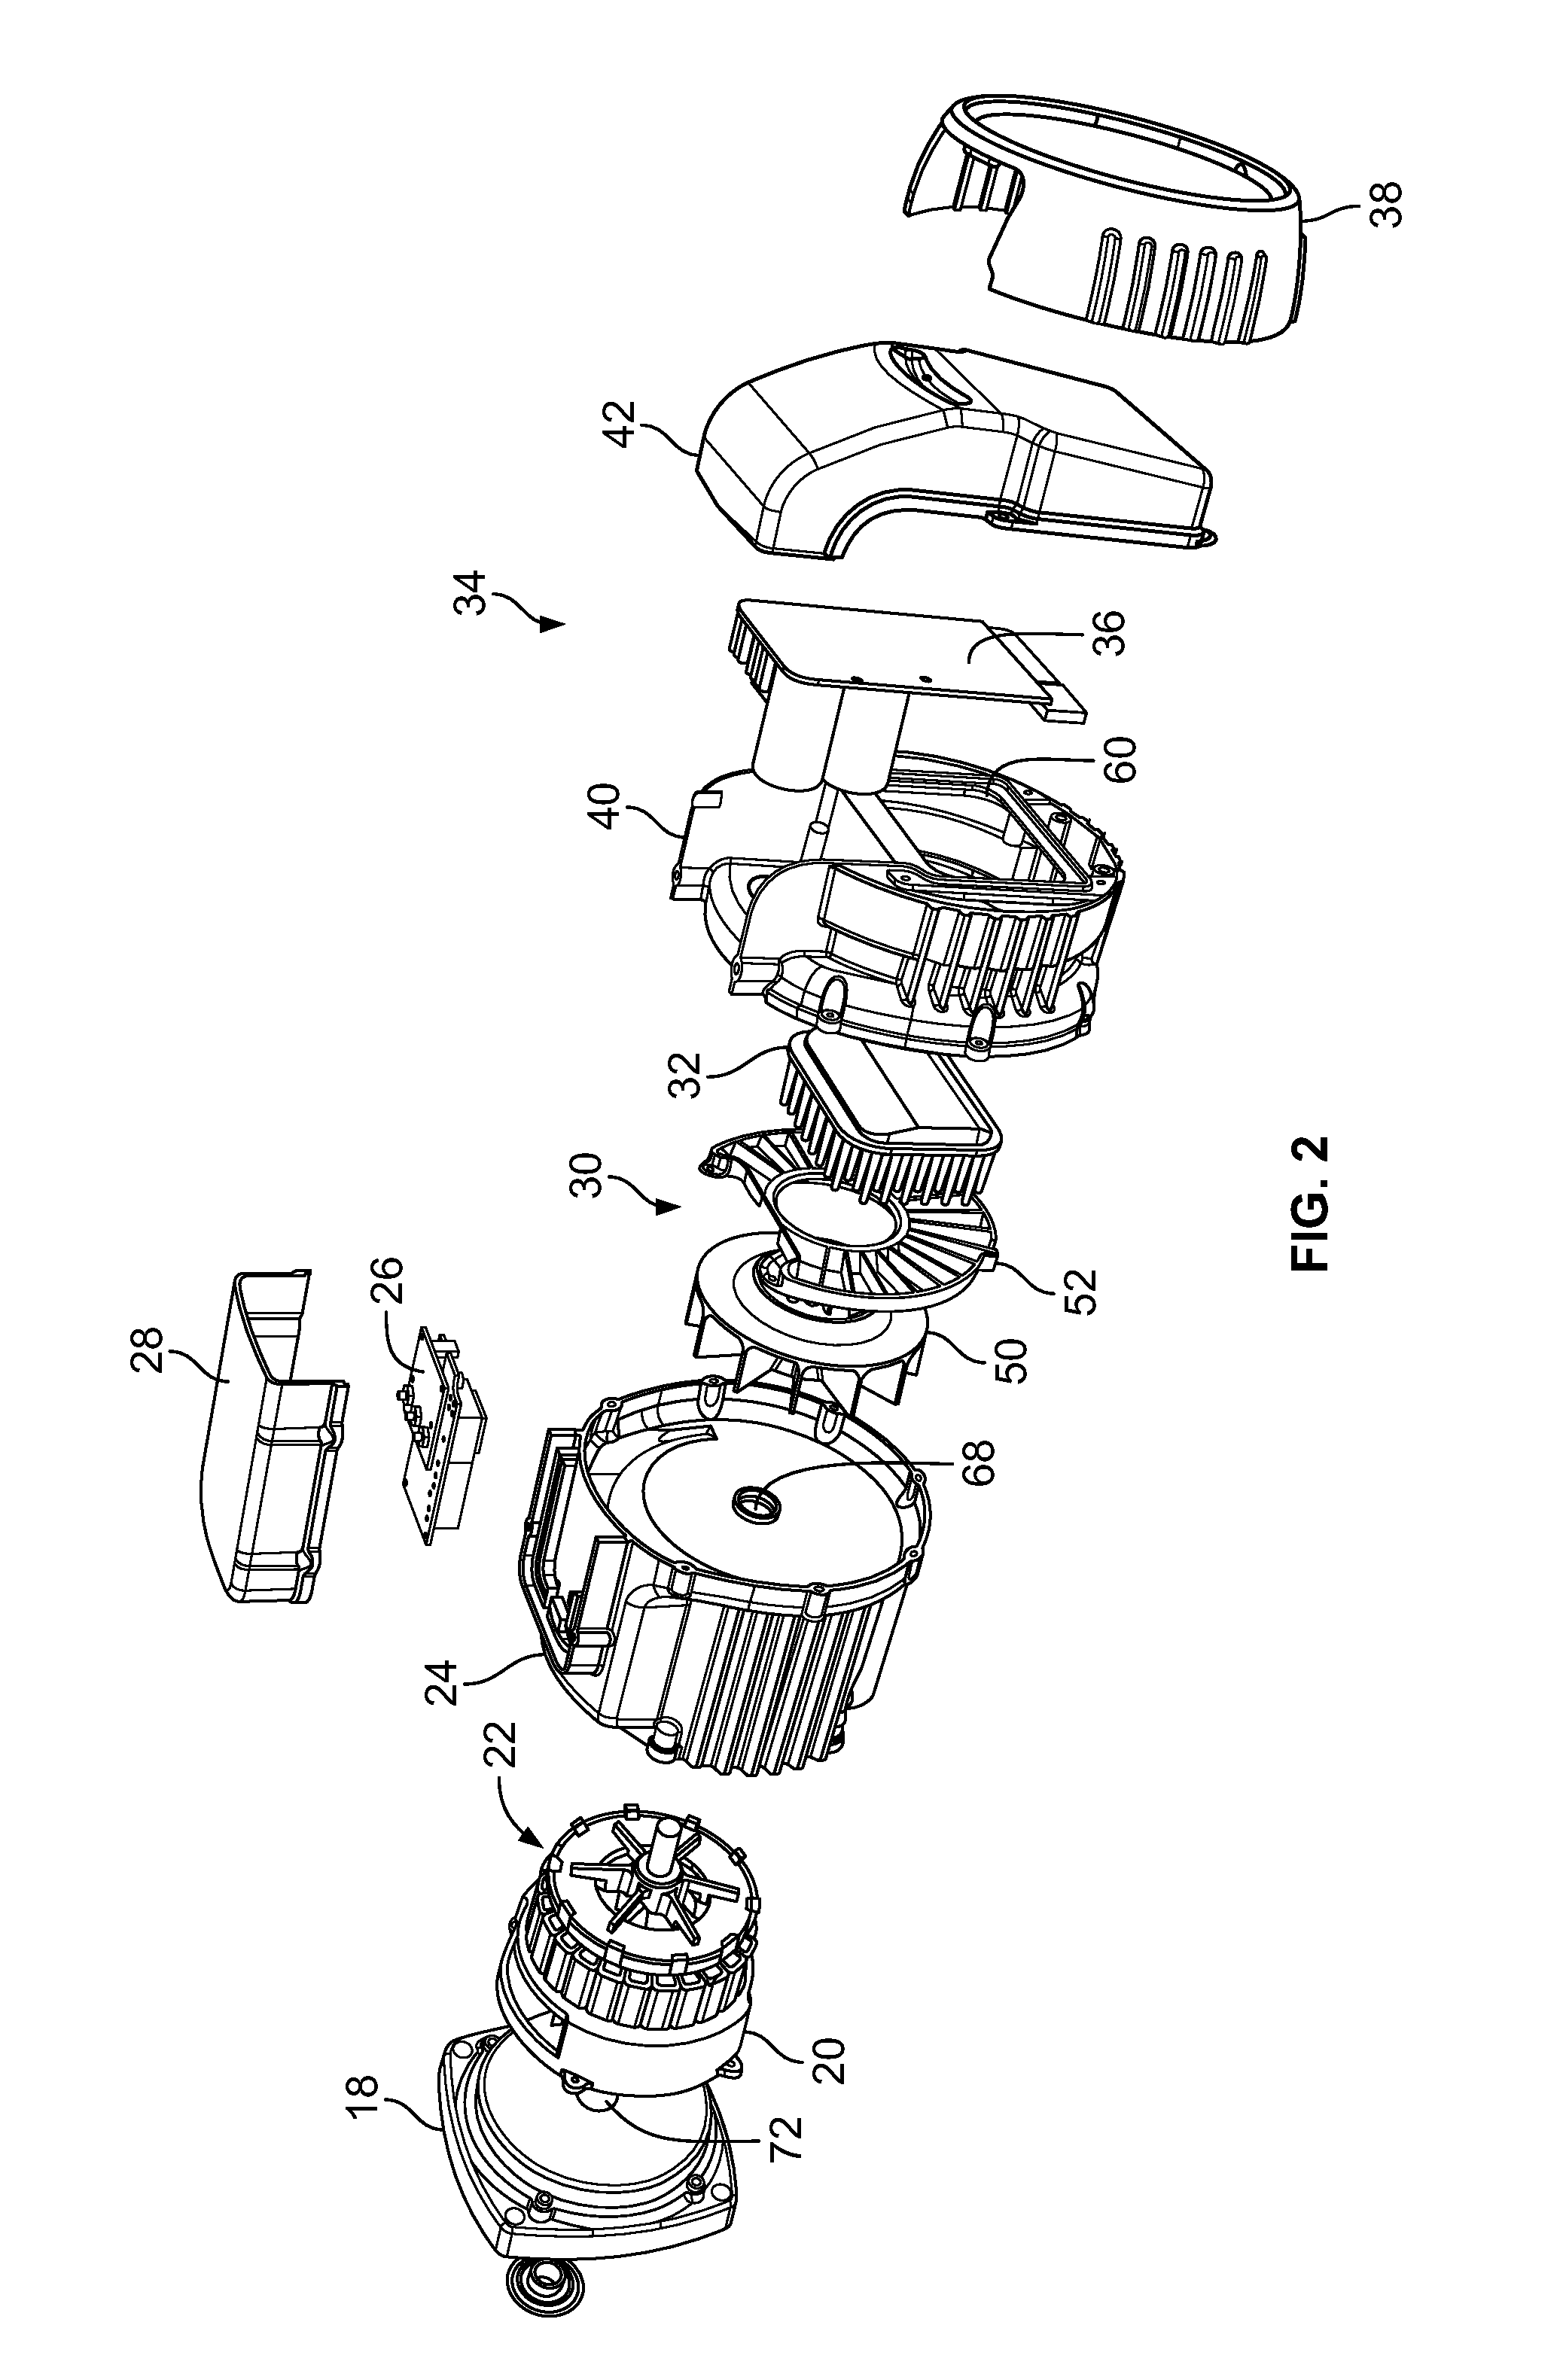 Air-cooled electric machine and method of assembling the same